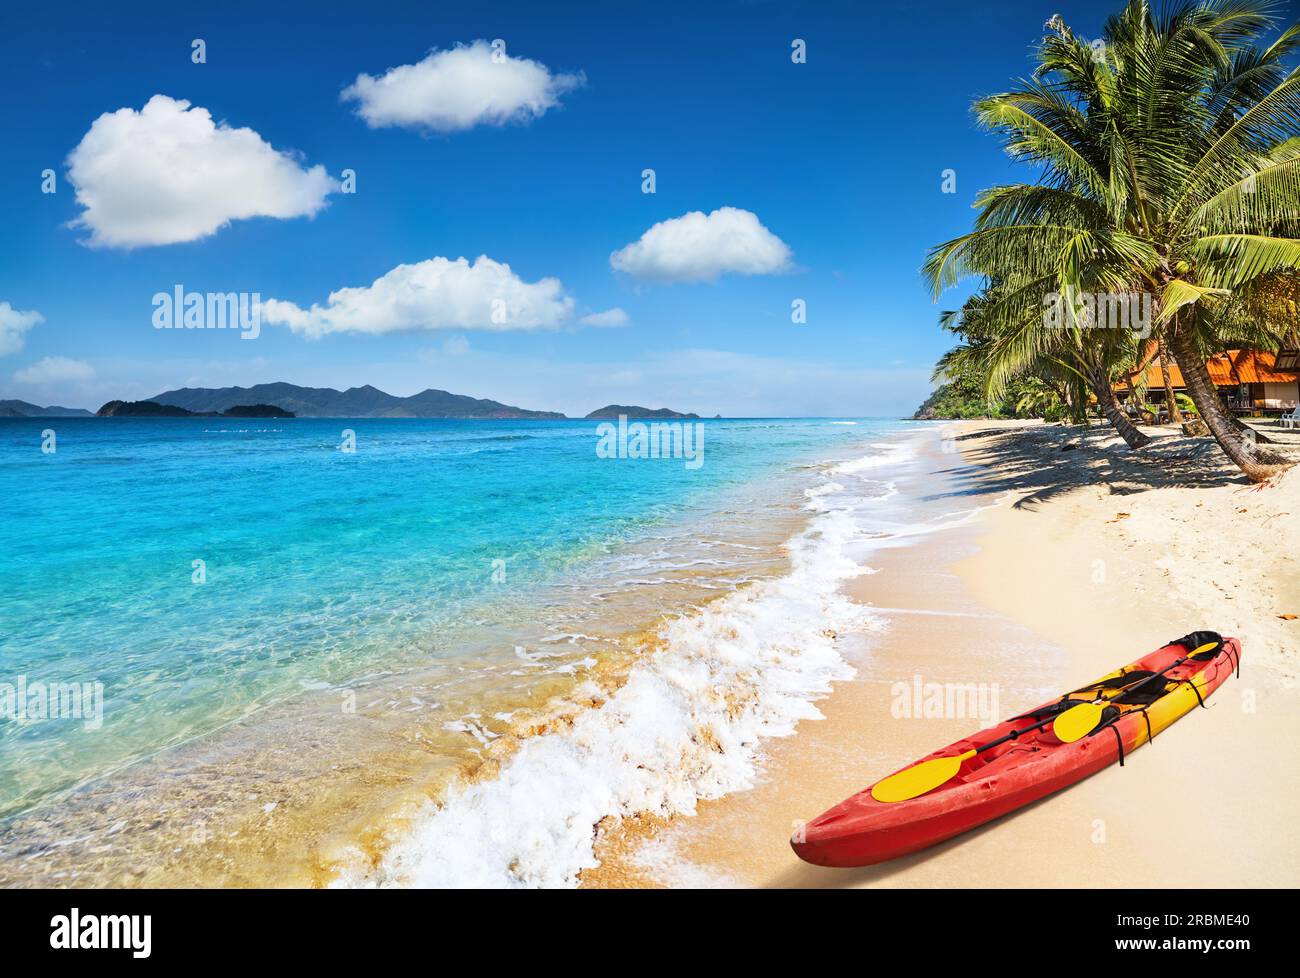 Paradise tropical beach with palm trees and clear sea Stock Photo